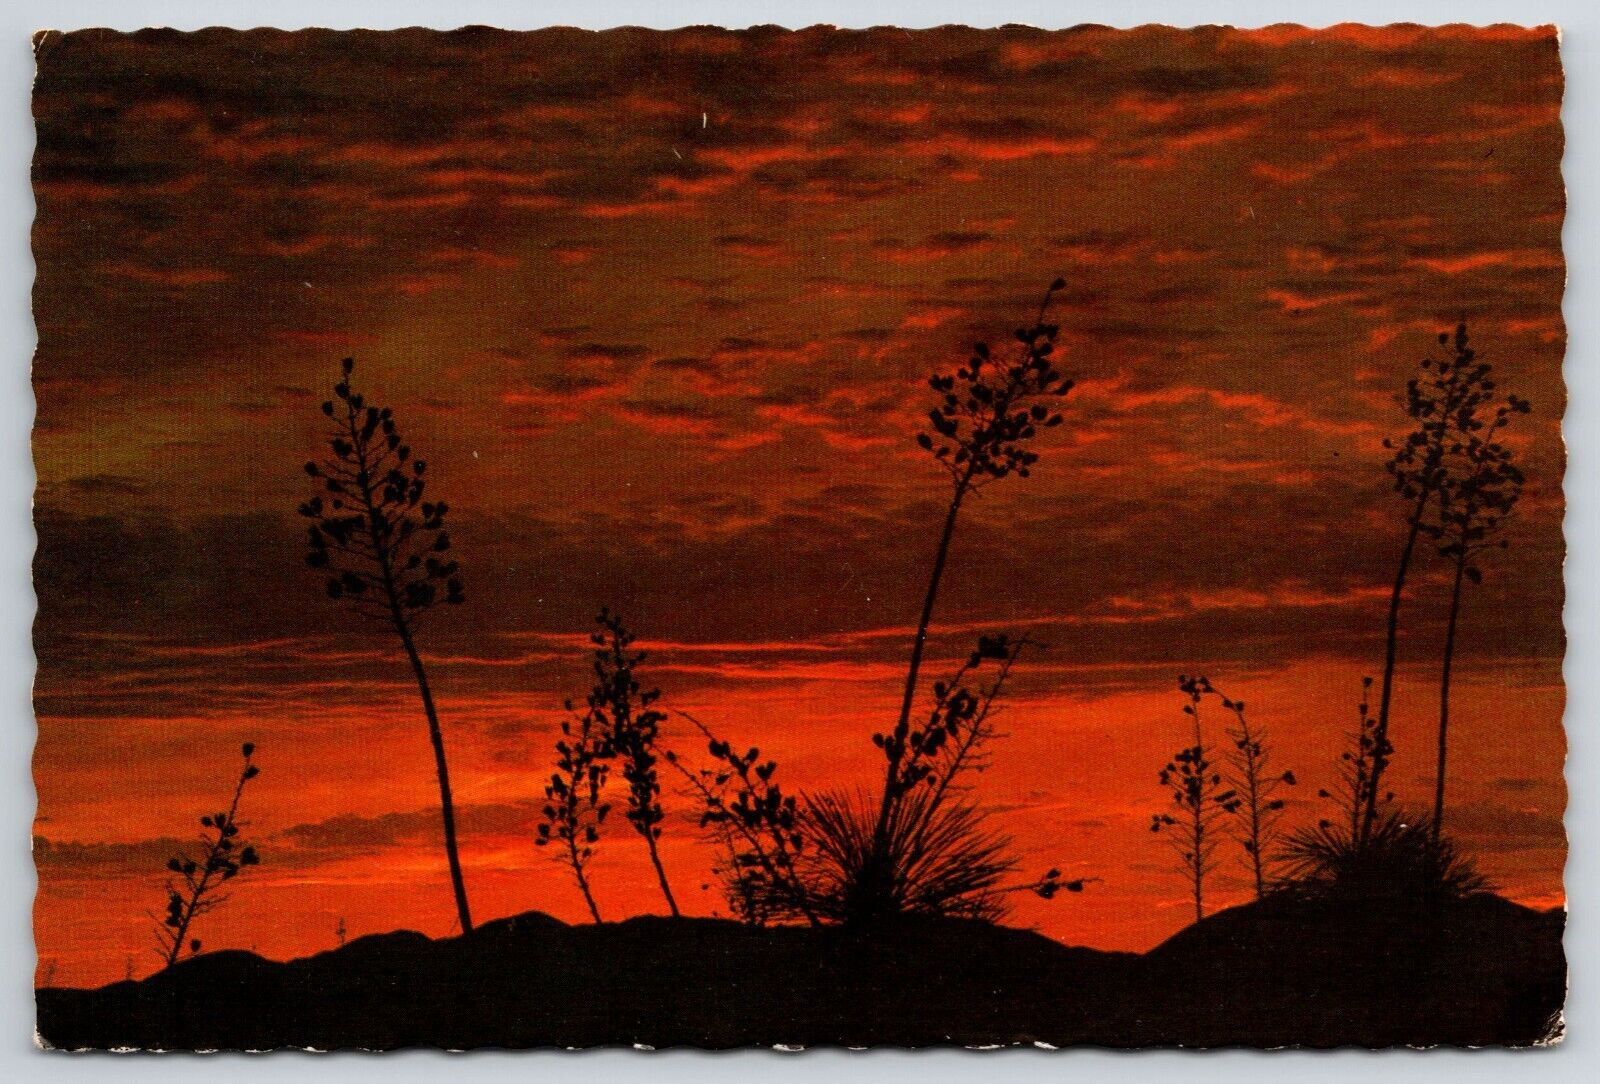 Yuccas Silhouetted at Sunset AZ Postcard 6x4 Colorful Desert Sky Scene